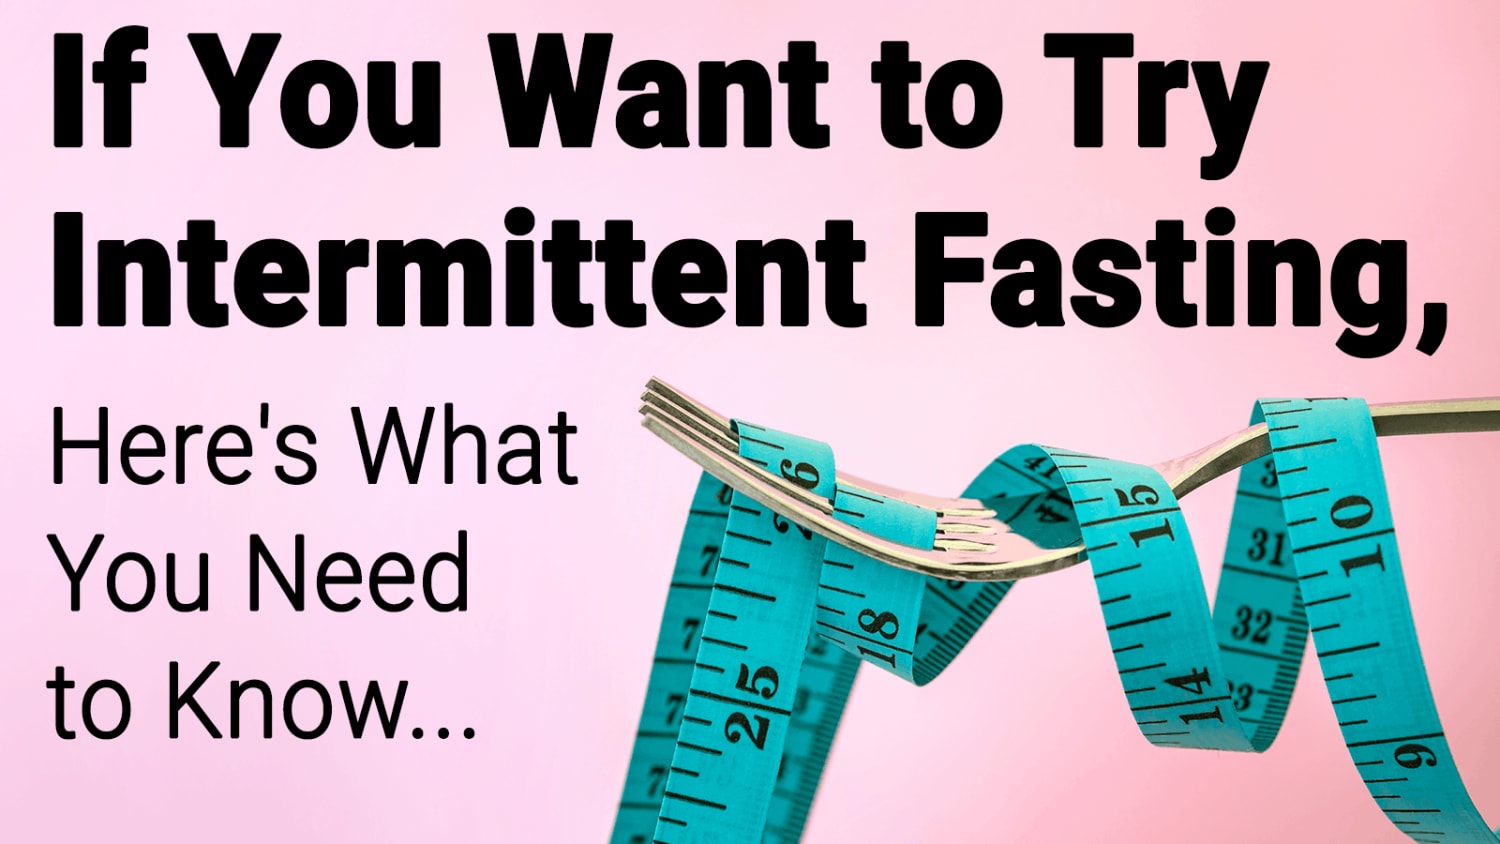 If You Want to Try Intermittent Fasting, Here's What You Need to Know...